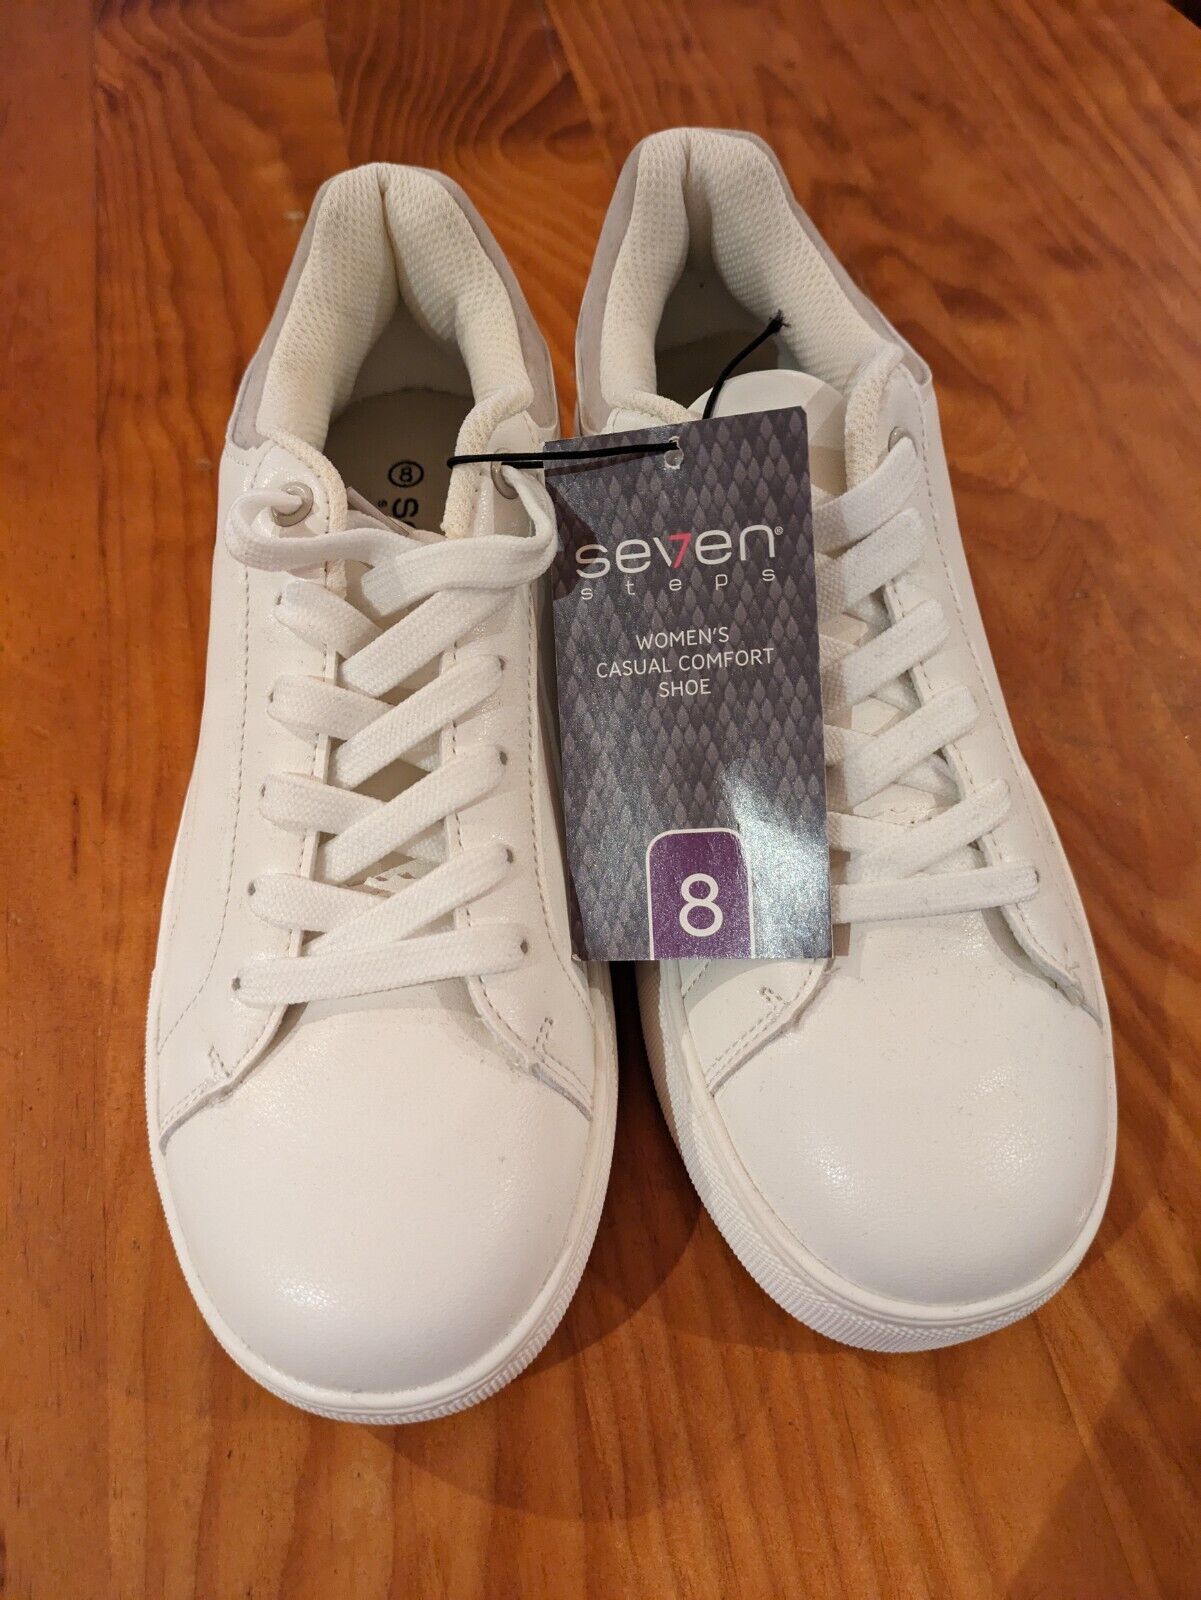 Ladies White Runners Nwt Size 8